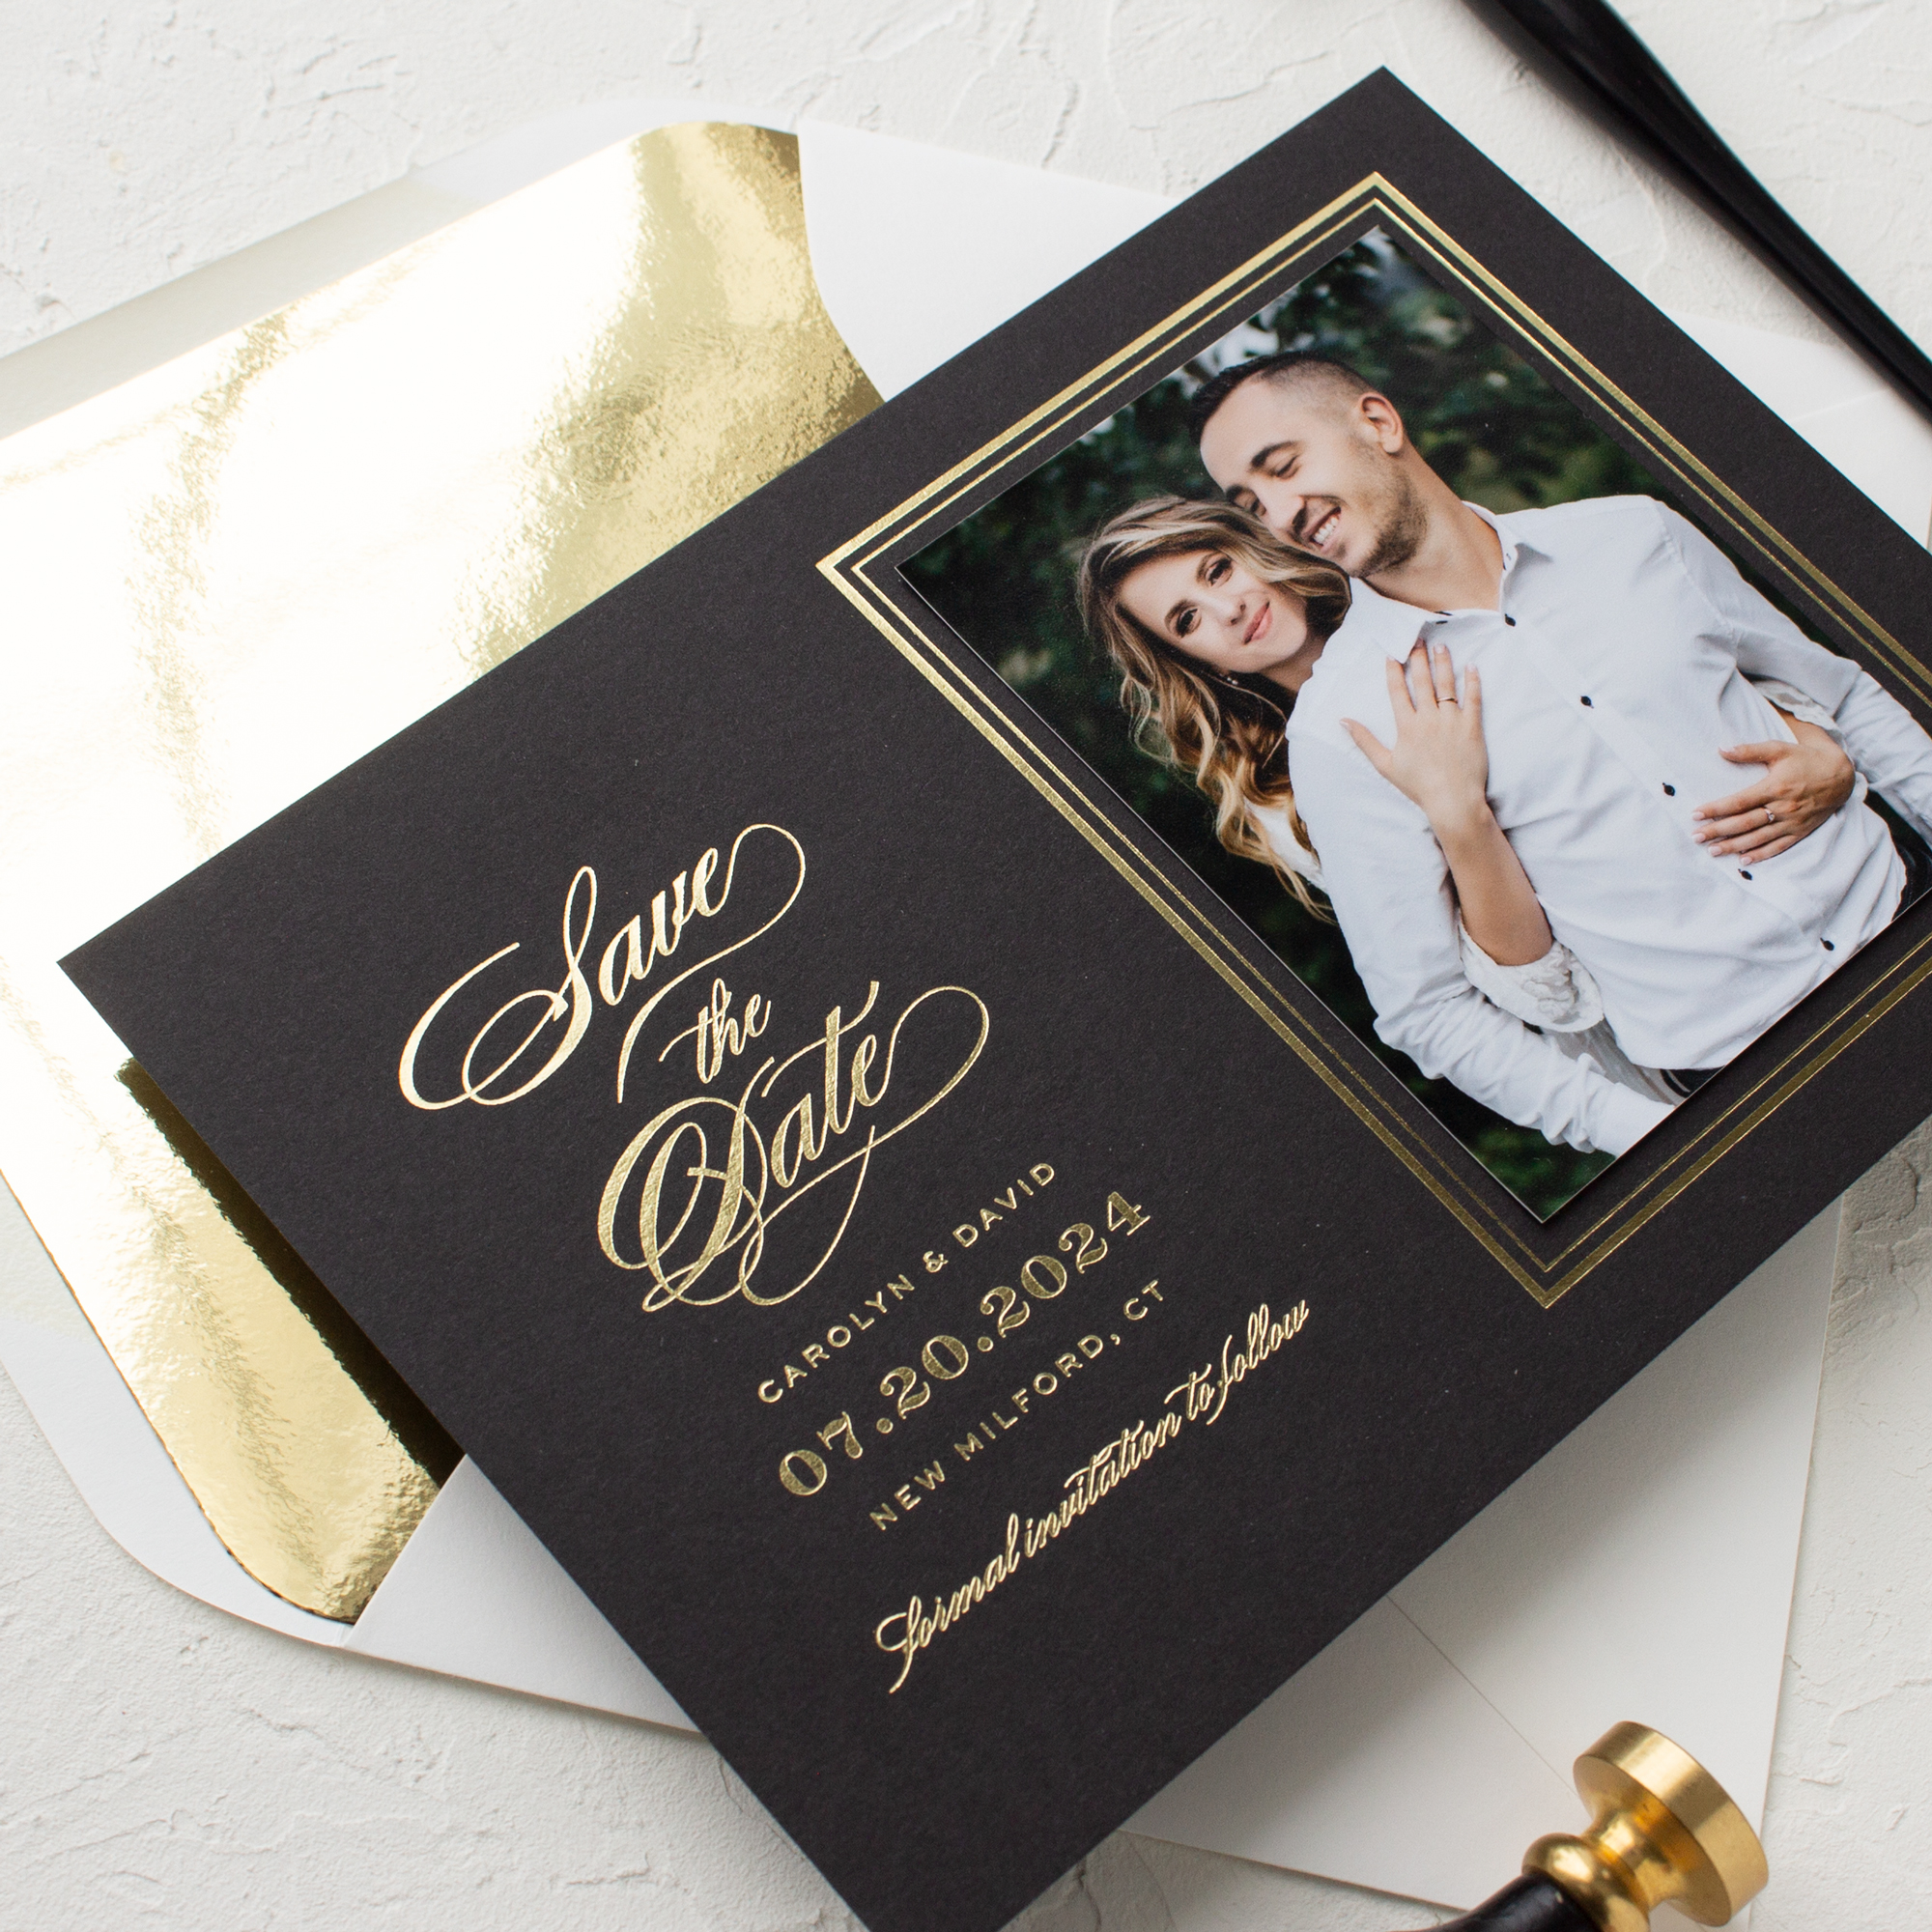 Copper Foil Save the date Invitations Save the date Custom Cards Wedding set 